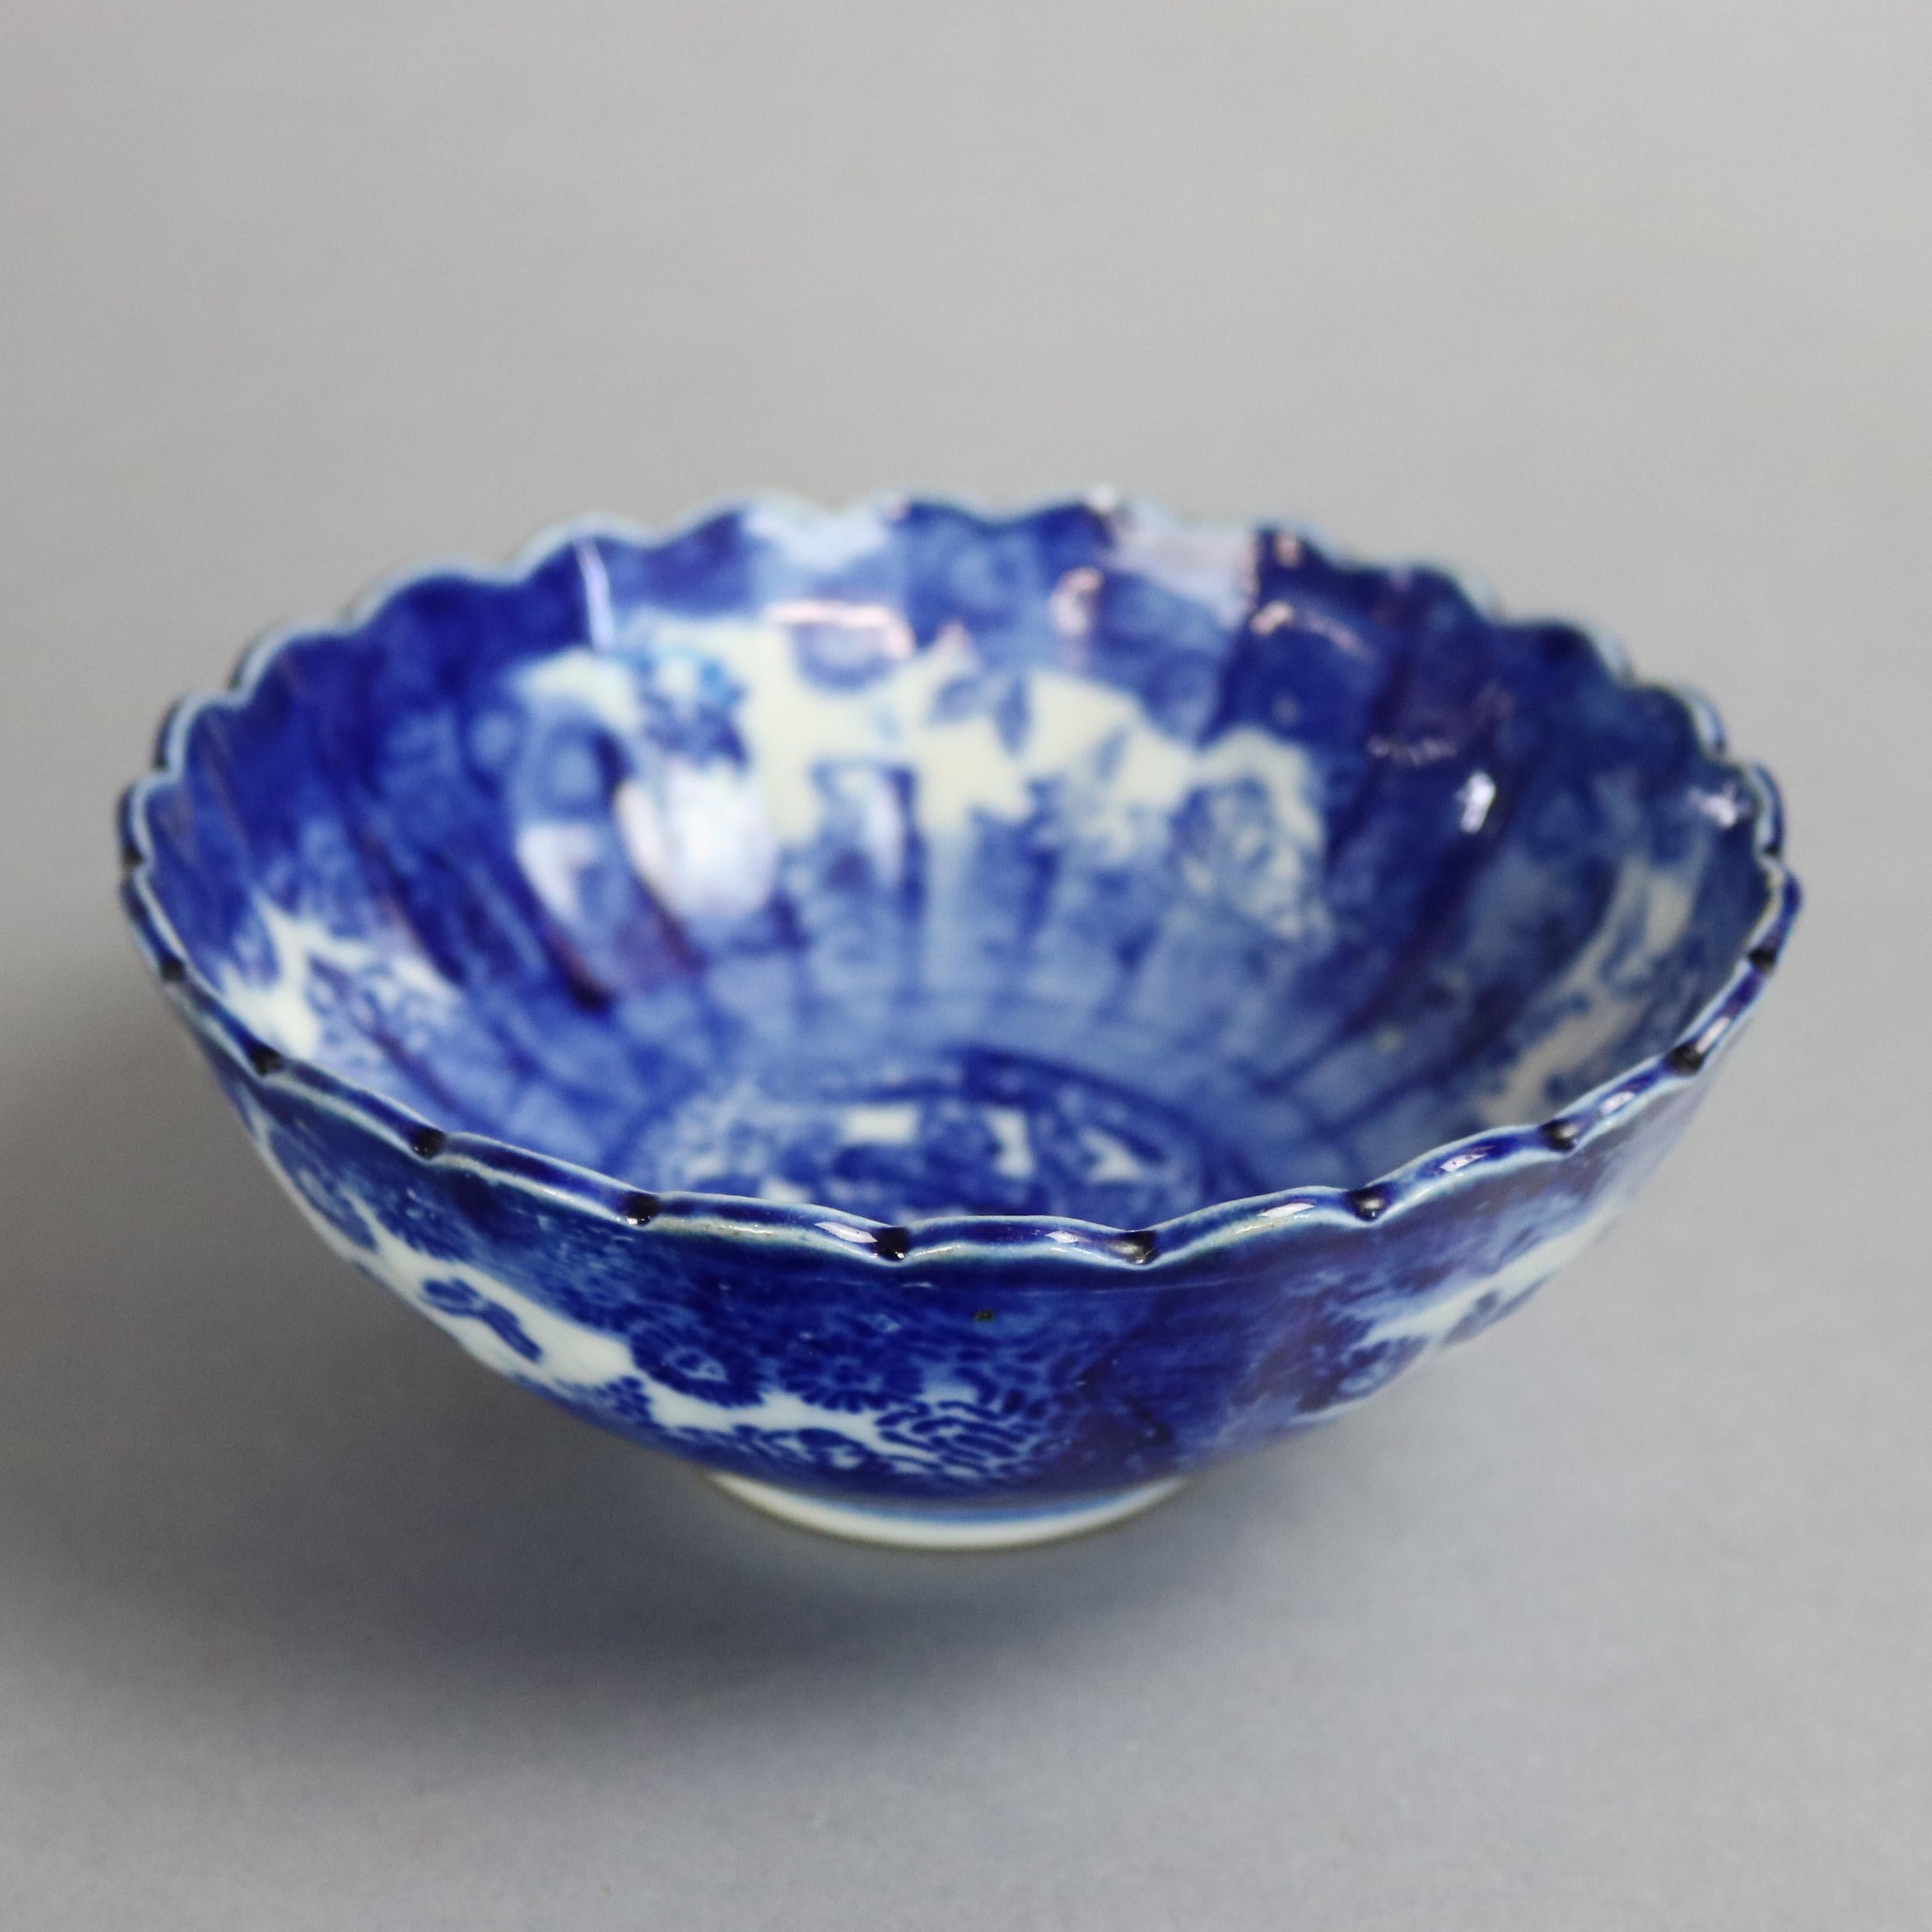 An antique Chinese canton bowl offers blue and white painted porcelain with figures, foliate and floral decoration inside and out with scalloped rim, 19th century

Measures: 2.5